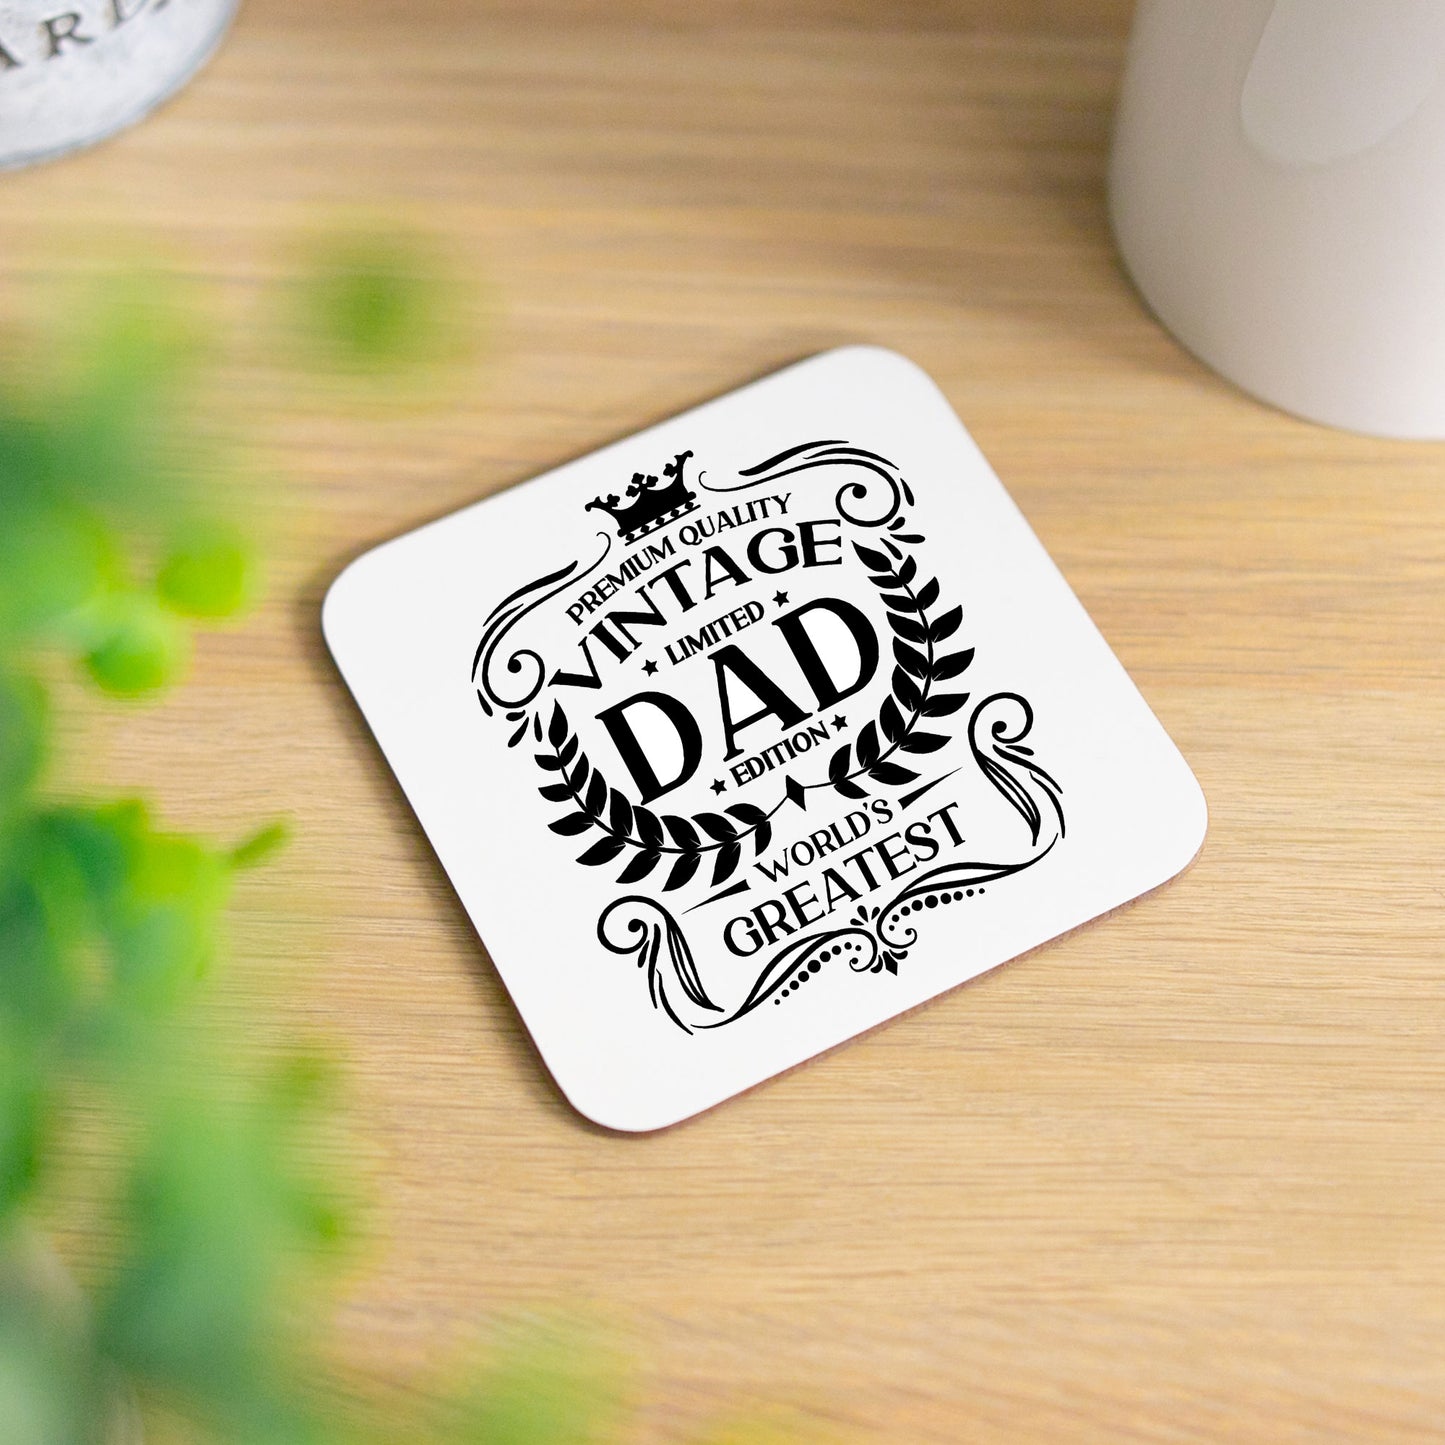 Vintage World's Greatest Dad Engraved Beer Pint Glass  - Always Looking Good - Printed Coaster Only  